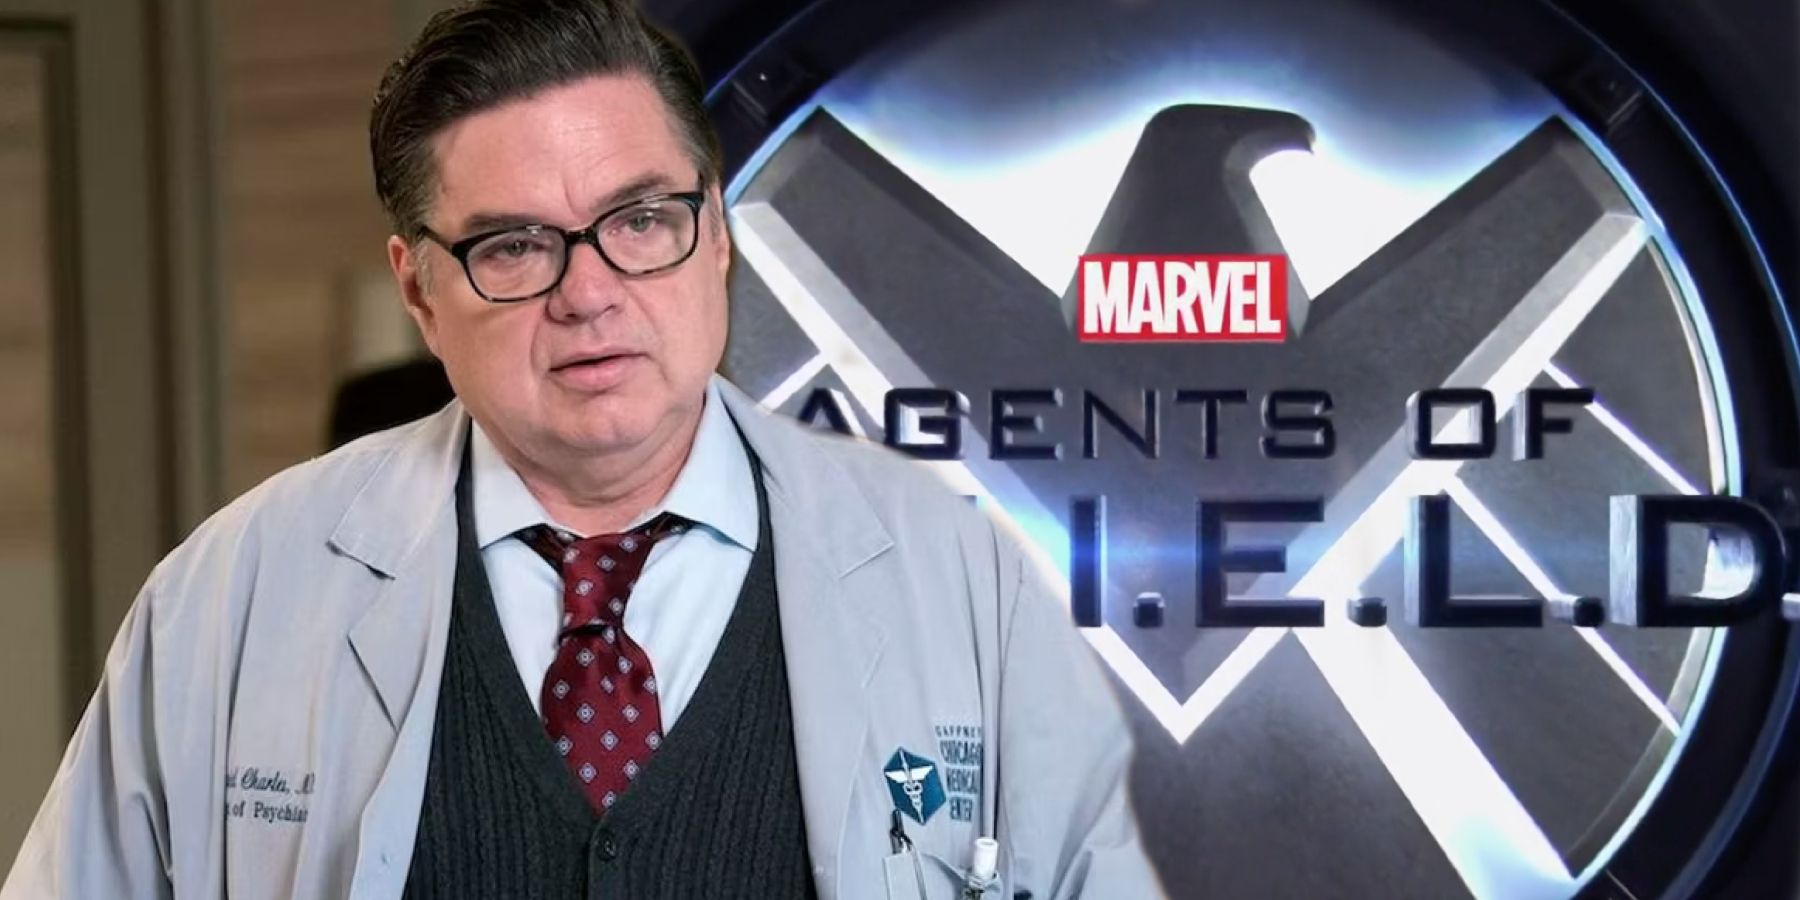 Custom image of Dr. Charles from Chicago Med in front of the Agents of SHIELD logo